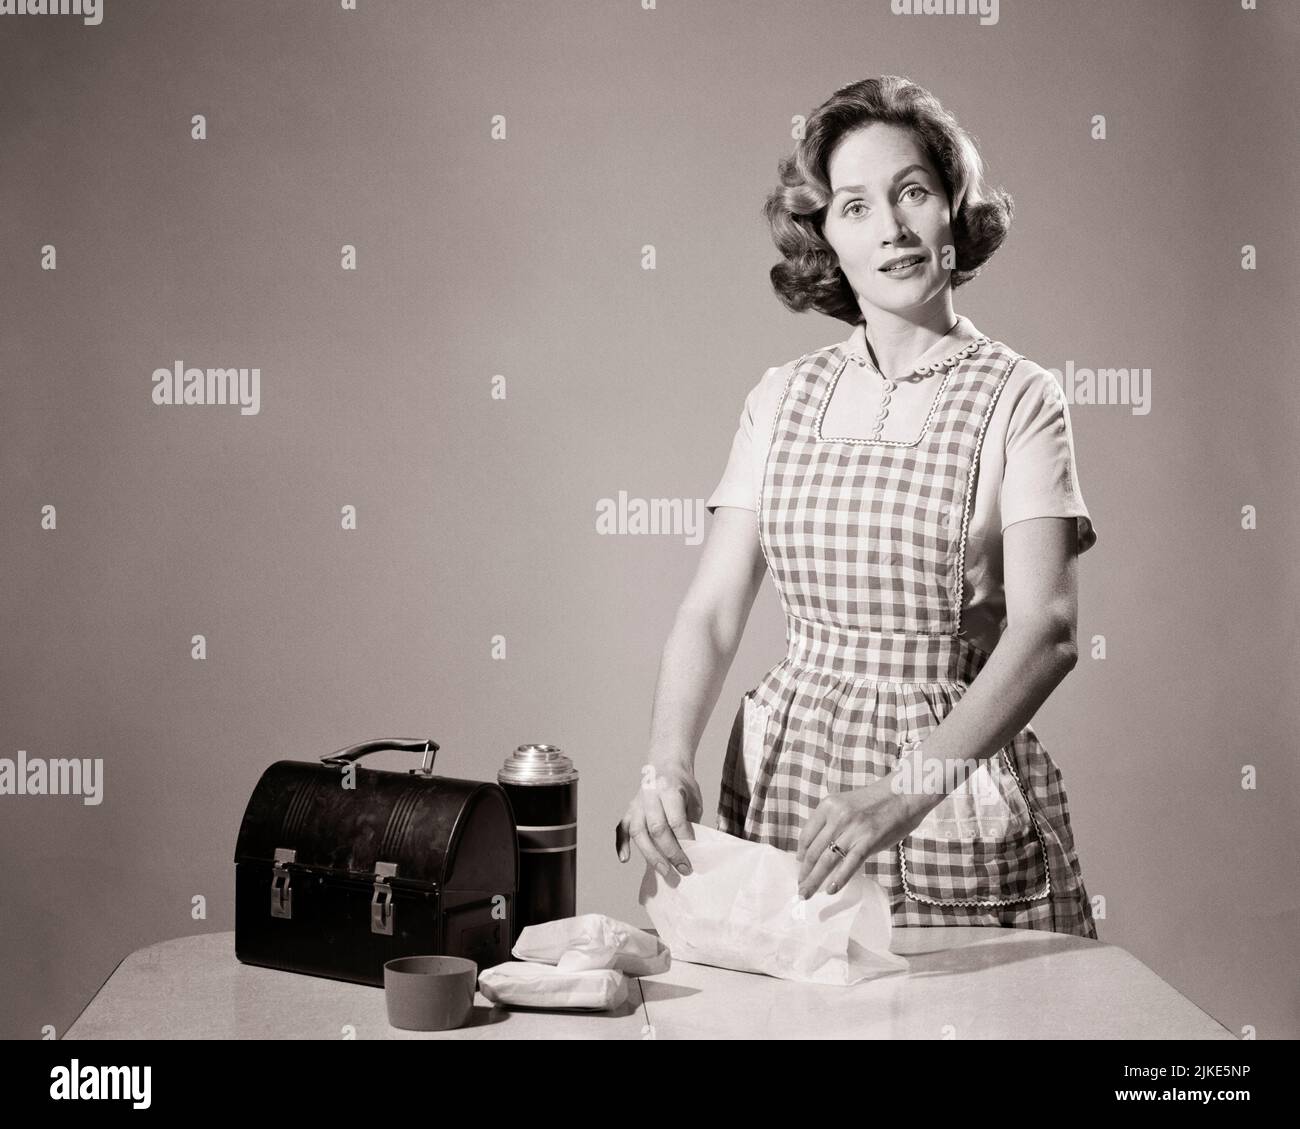 1960s WOMAN HOUSEWIFE WEARING CHECKERED APRON LOOKING AT CAMERA PREPARING PACKING LUNCH BOX AND THERMOS BOTTLE IN KITCHEN - h3321 DEB001 HARS CARING B&W EYE CONTACT HOMEMAKER HOMEMAKERS CHORE AND THERMOS HOUSEWIVES TASKS DEB001 CHECKERED MID-ADULT MID-ADULT WOMAN TASK UNFULFILLED WIVES YOUNG ADULT WOMAN BLACK AND WHITE CAUCASIAN ETHNICITY OLD FASHIONED Stock Photo